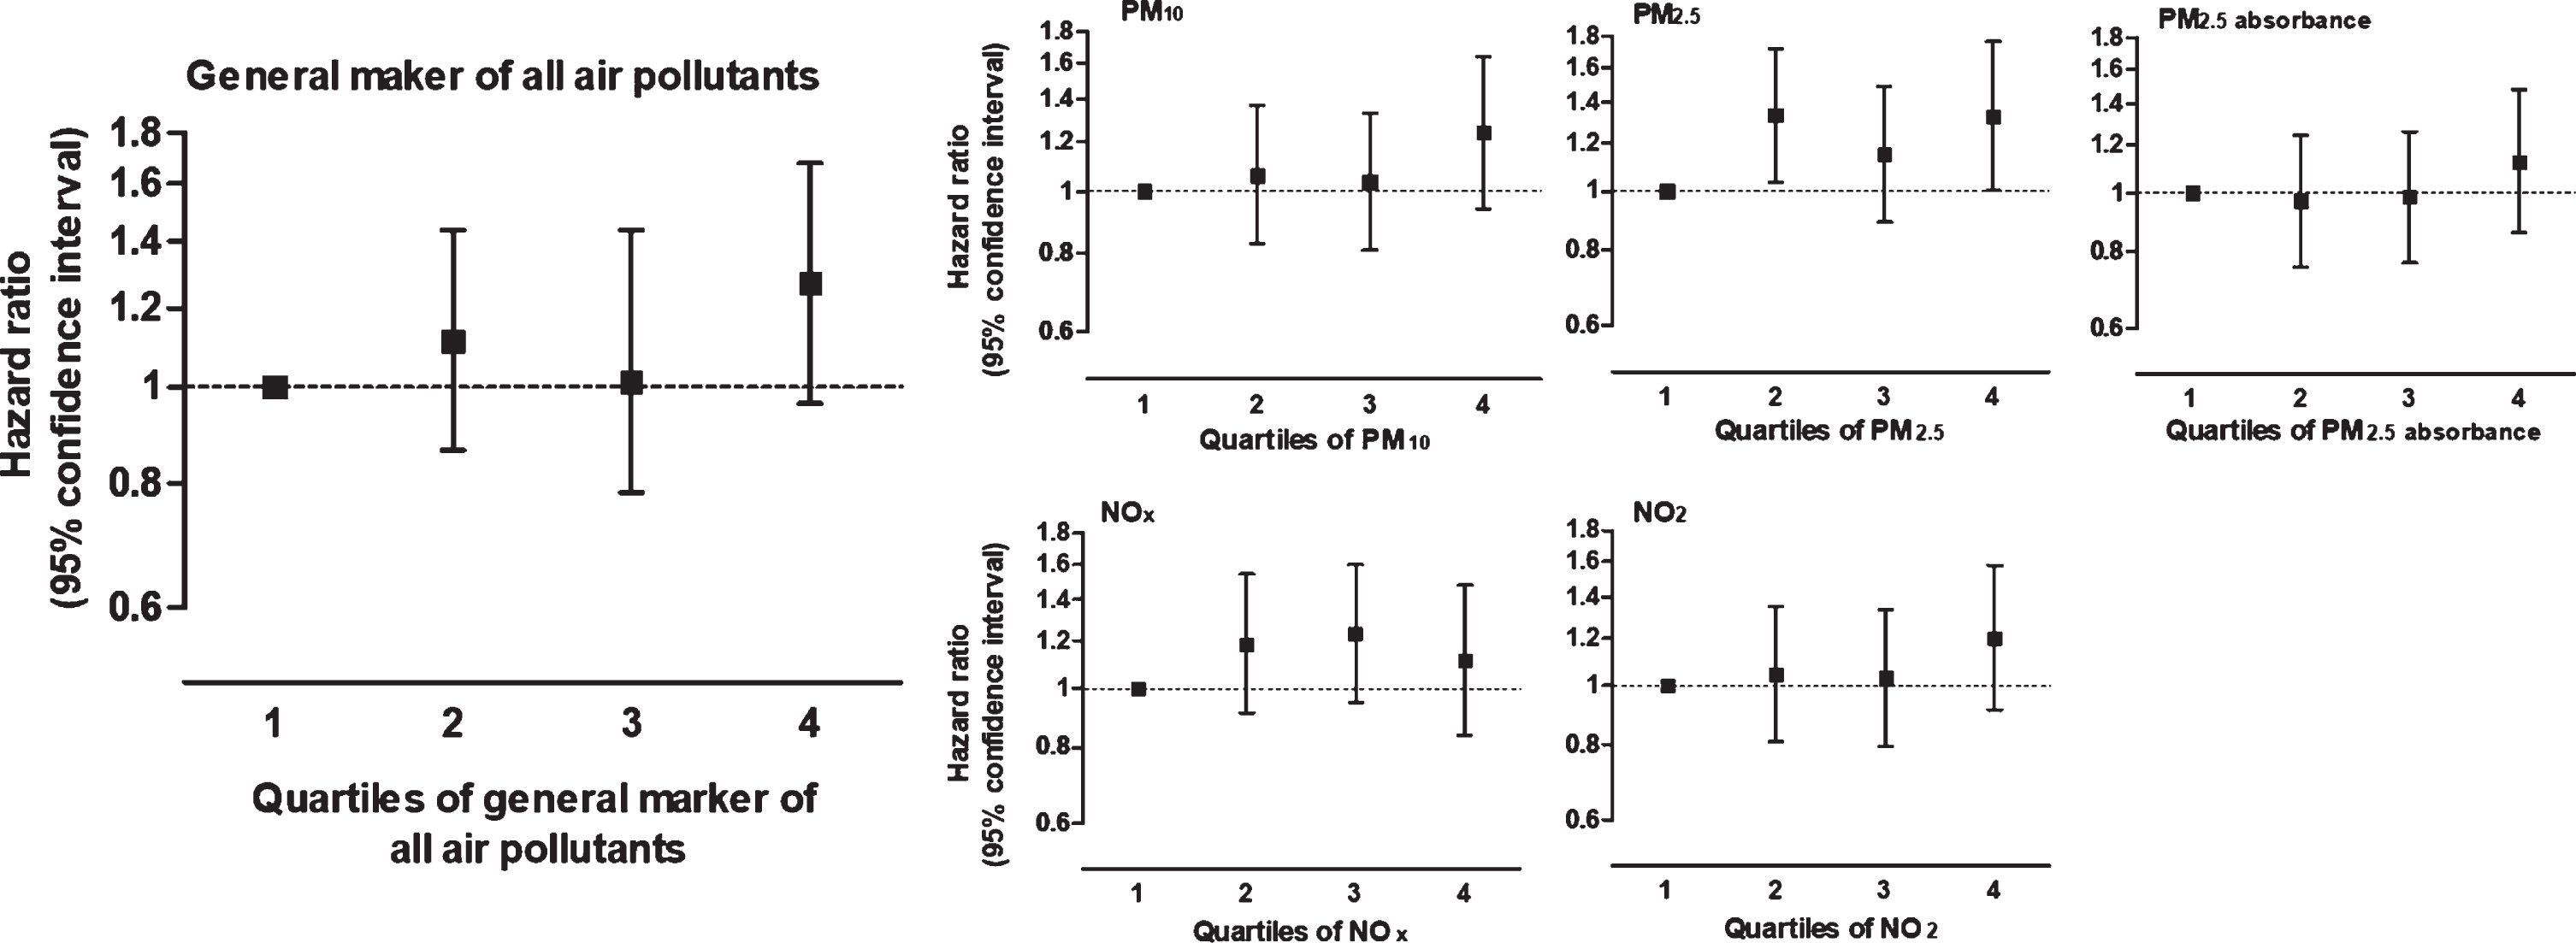 Exposure to air pollution per quartile in association with the risk of dementia. Models are adjusted for age, sex, level of education, smoking status, monthly household income, alcohol intake, physical activity, hours from home, body mass index, and depressive symptoms. NO, nitrogen oxide; PM, particulate matter.